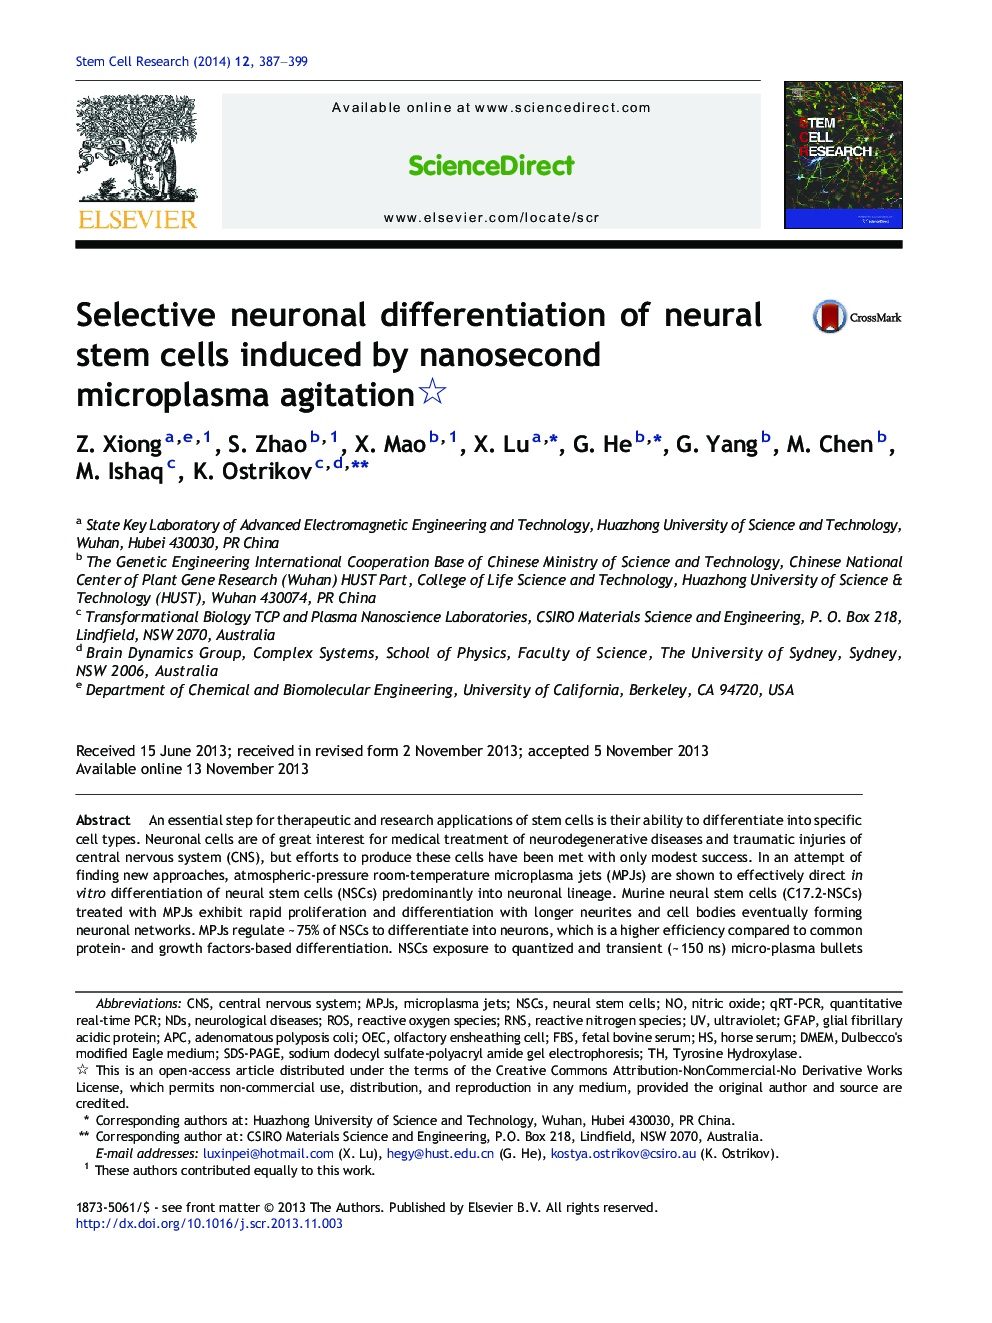 Selective neuronal differentiation of neural stem cells induced by nanosecond microplasma agitation 